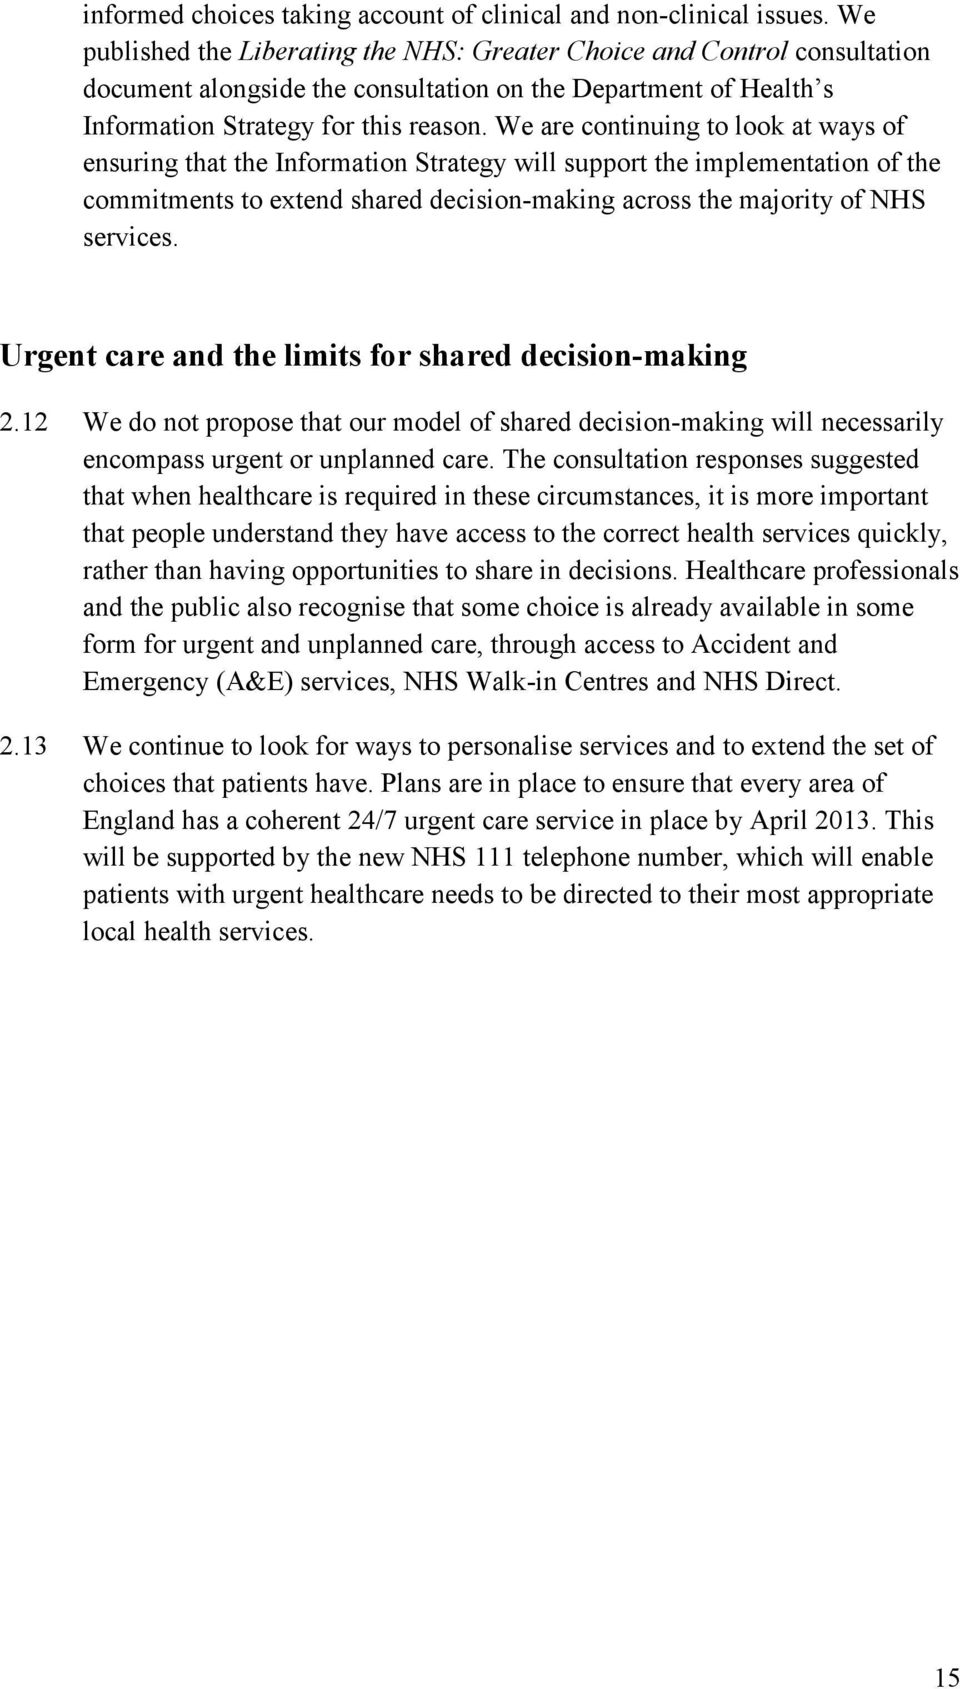 We are continuing to look at ways of ensuring that the Information Strategy will support the implementation of the commitments to extend shared decision-making across the majority of NHS services.